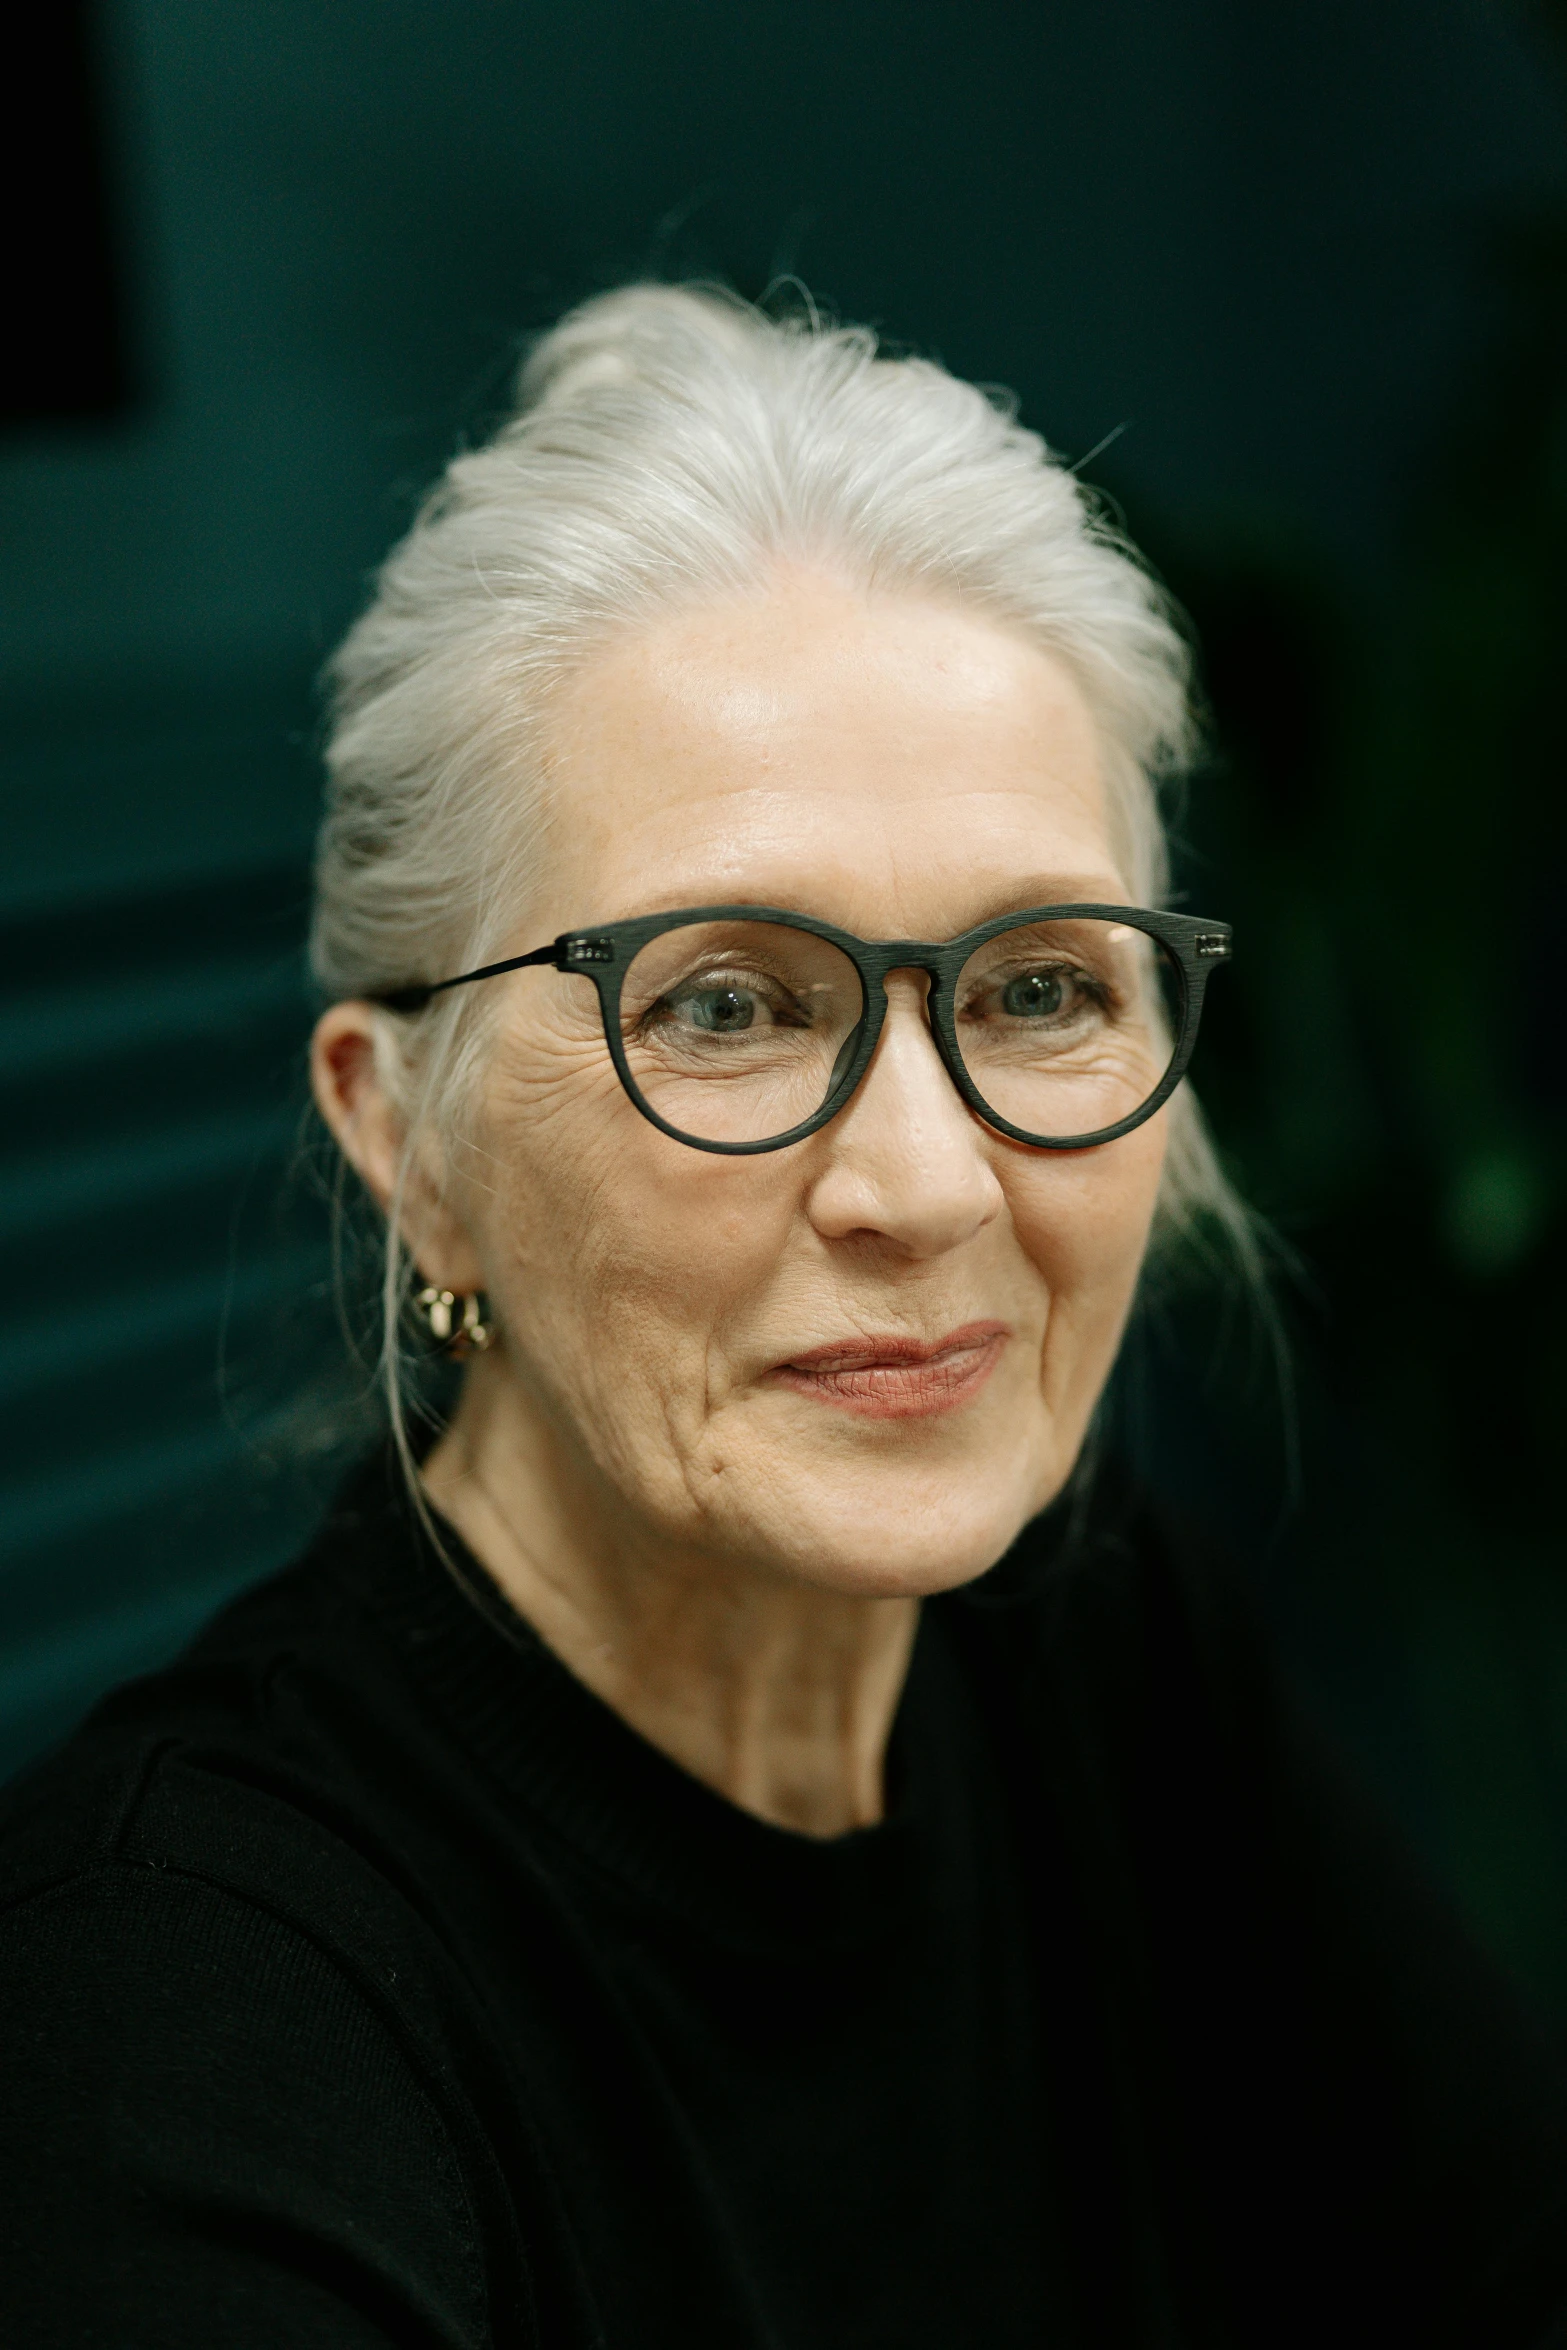 a woman with glasses sitting at a table, straight grey hair, marie - gabrielle capet style, lovingly looking at camera, profile image